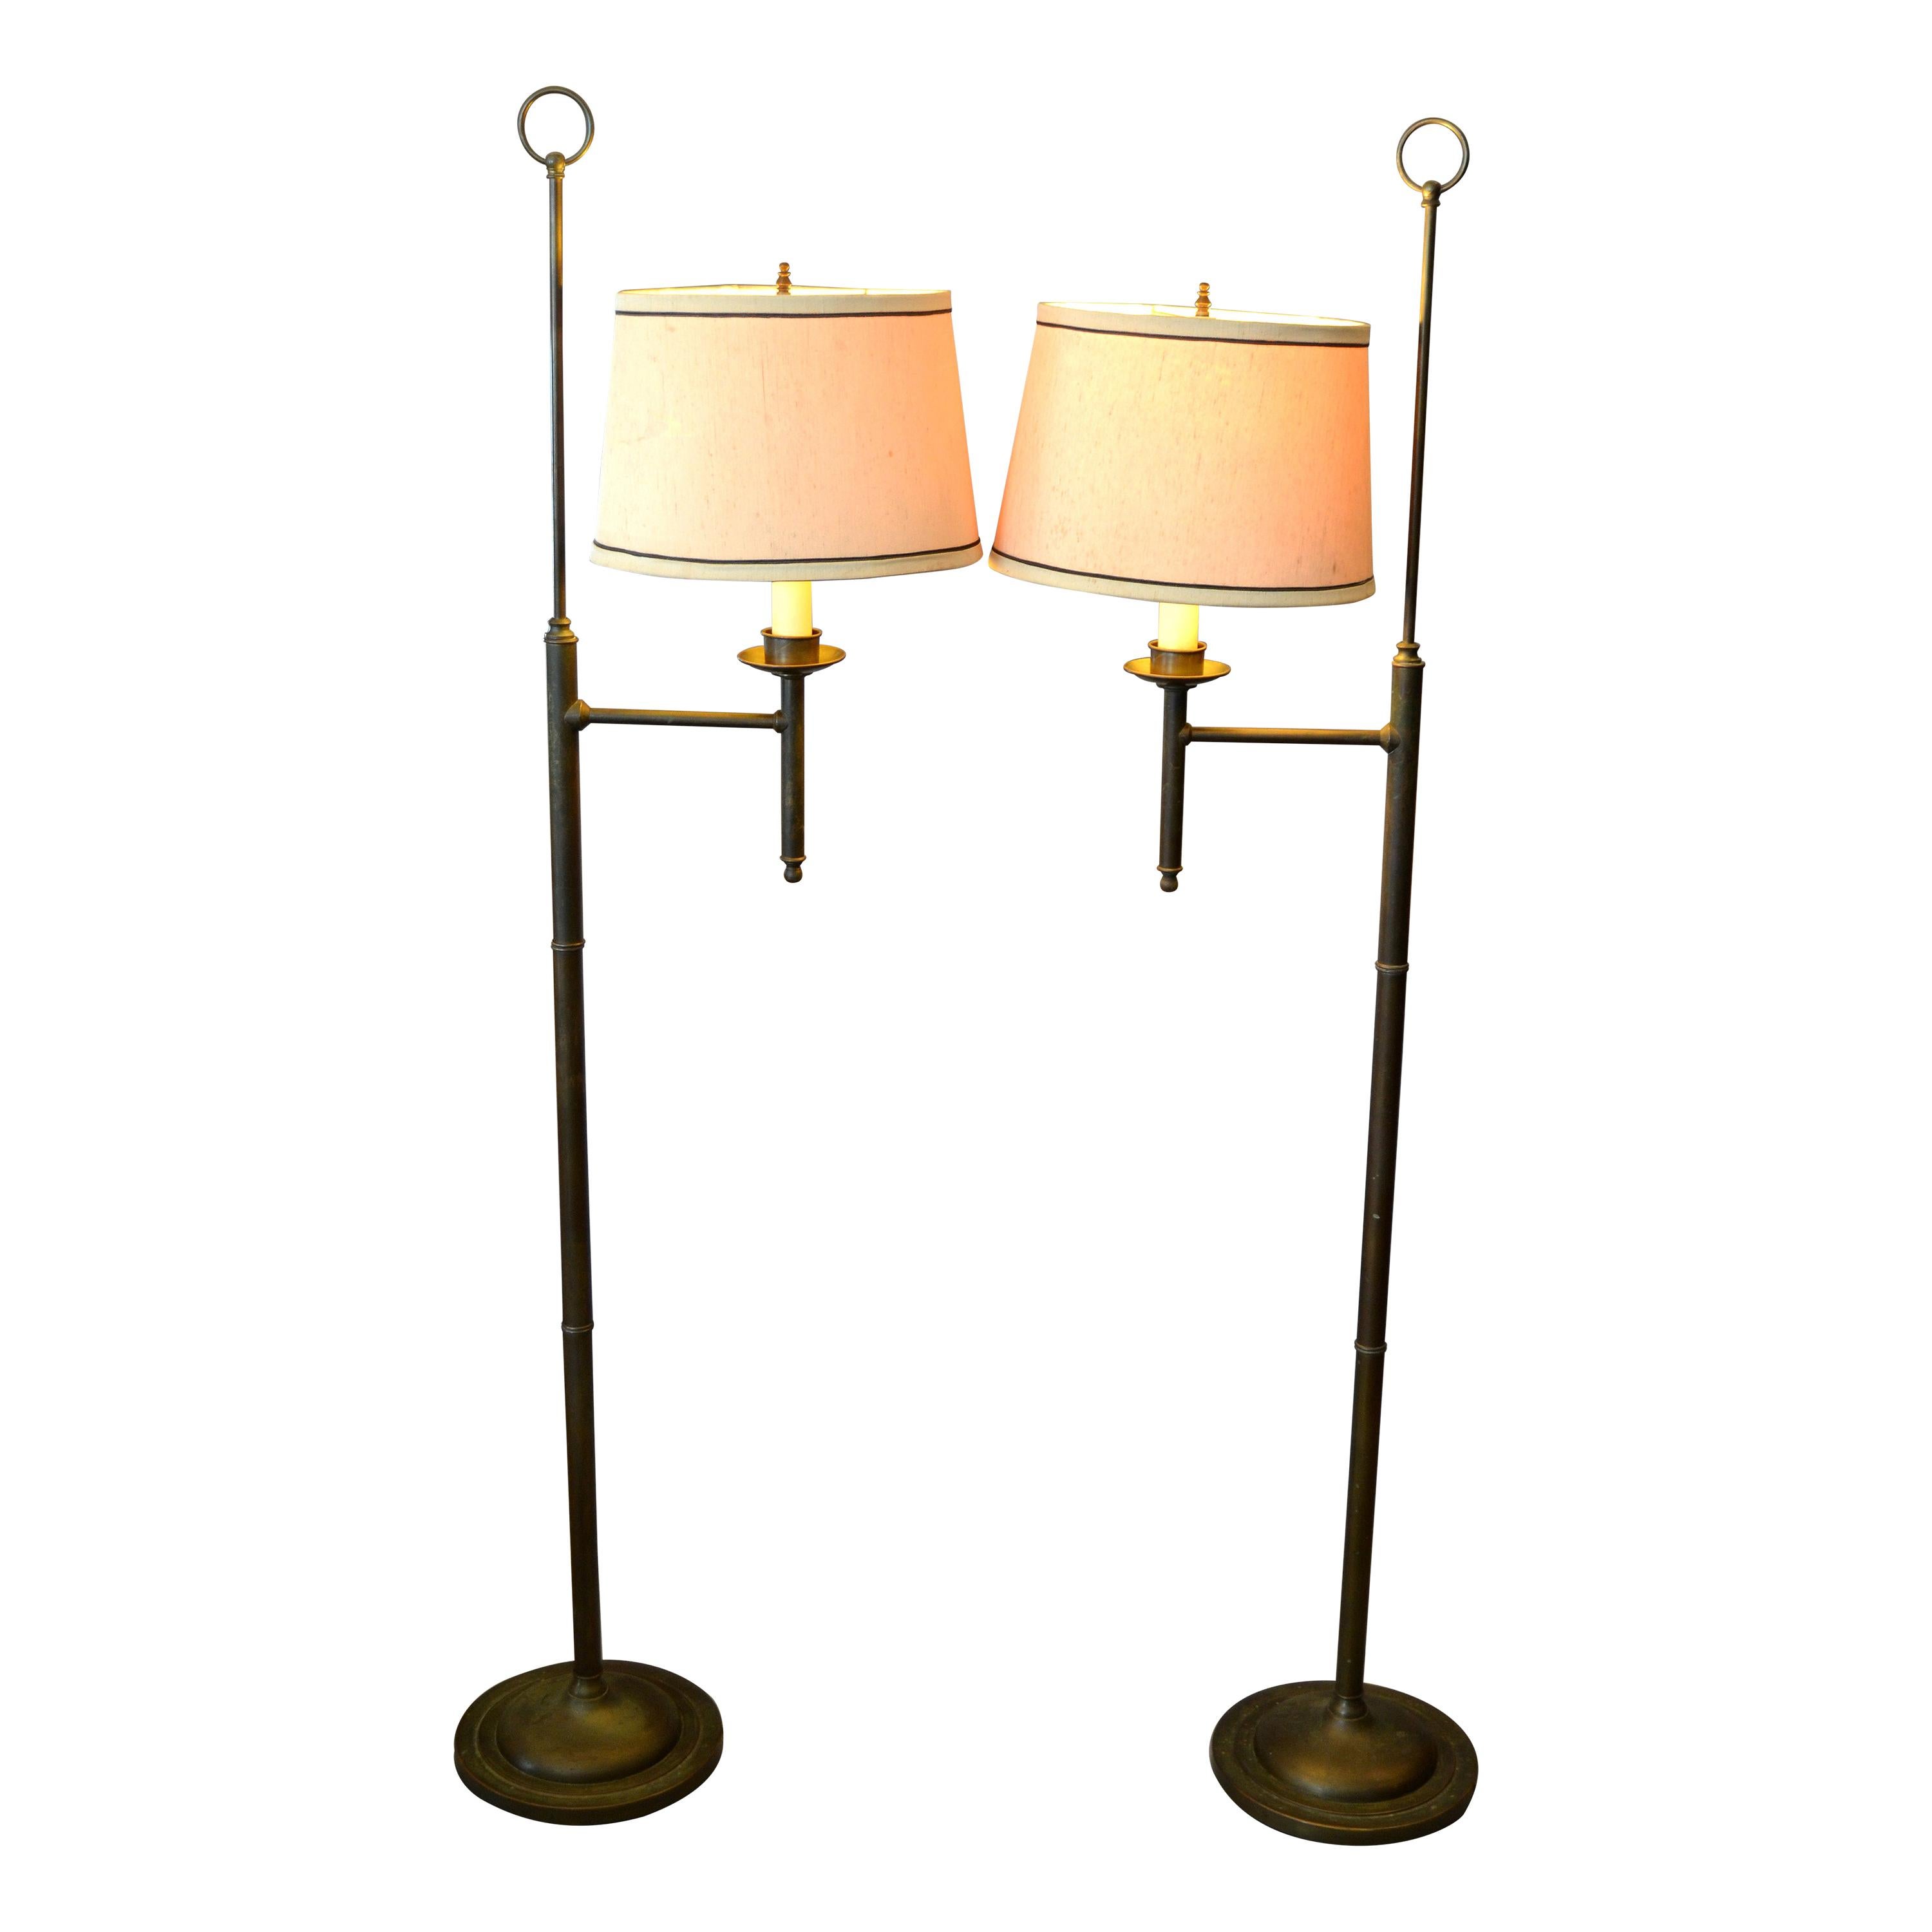 Pair of Vintage American Classical Bronze Floor Lamps with Shades